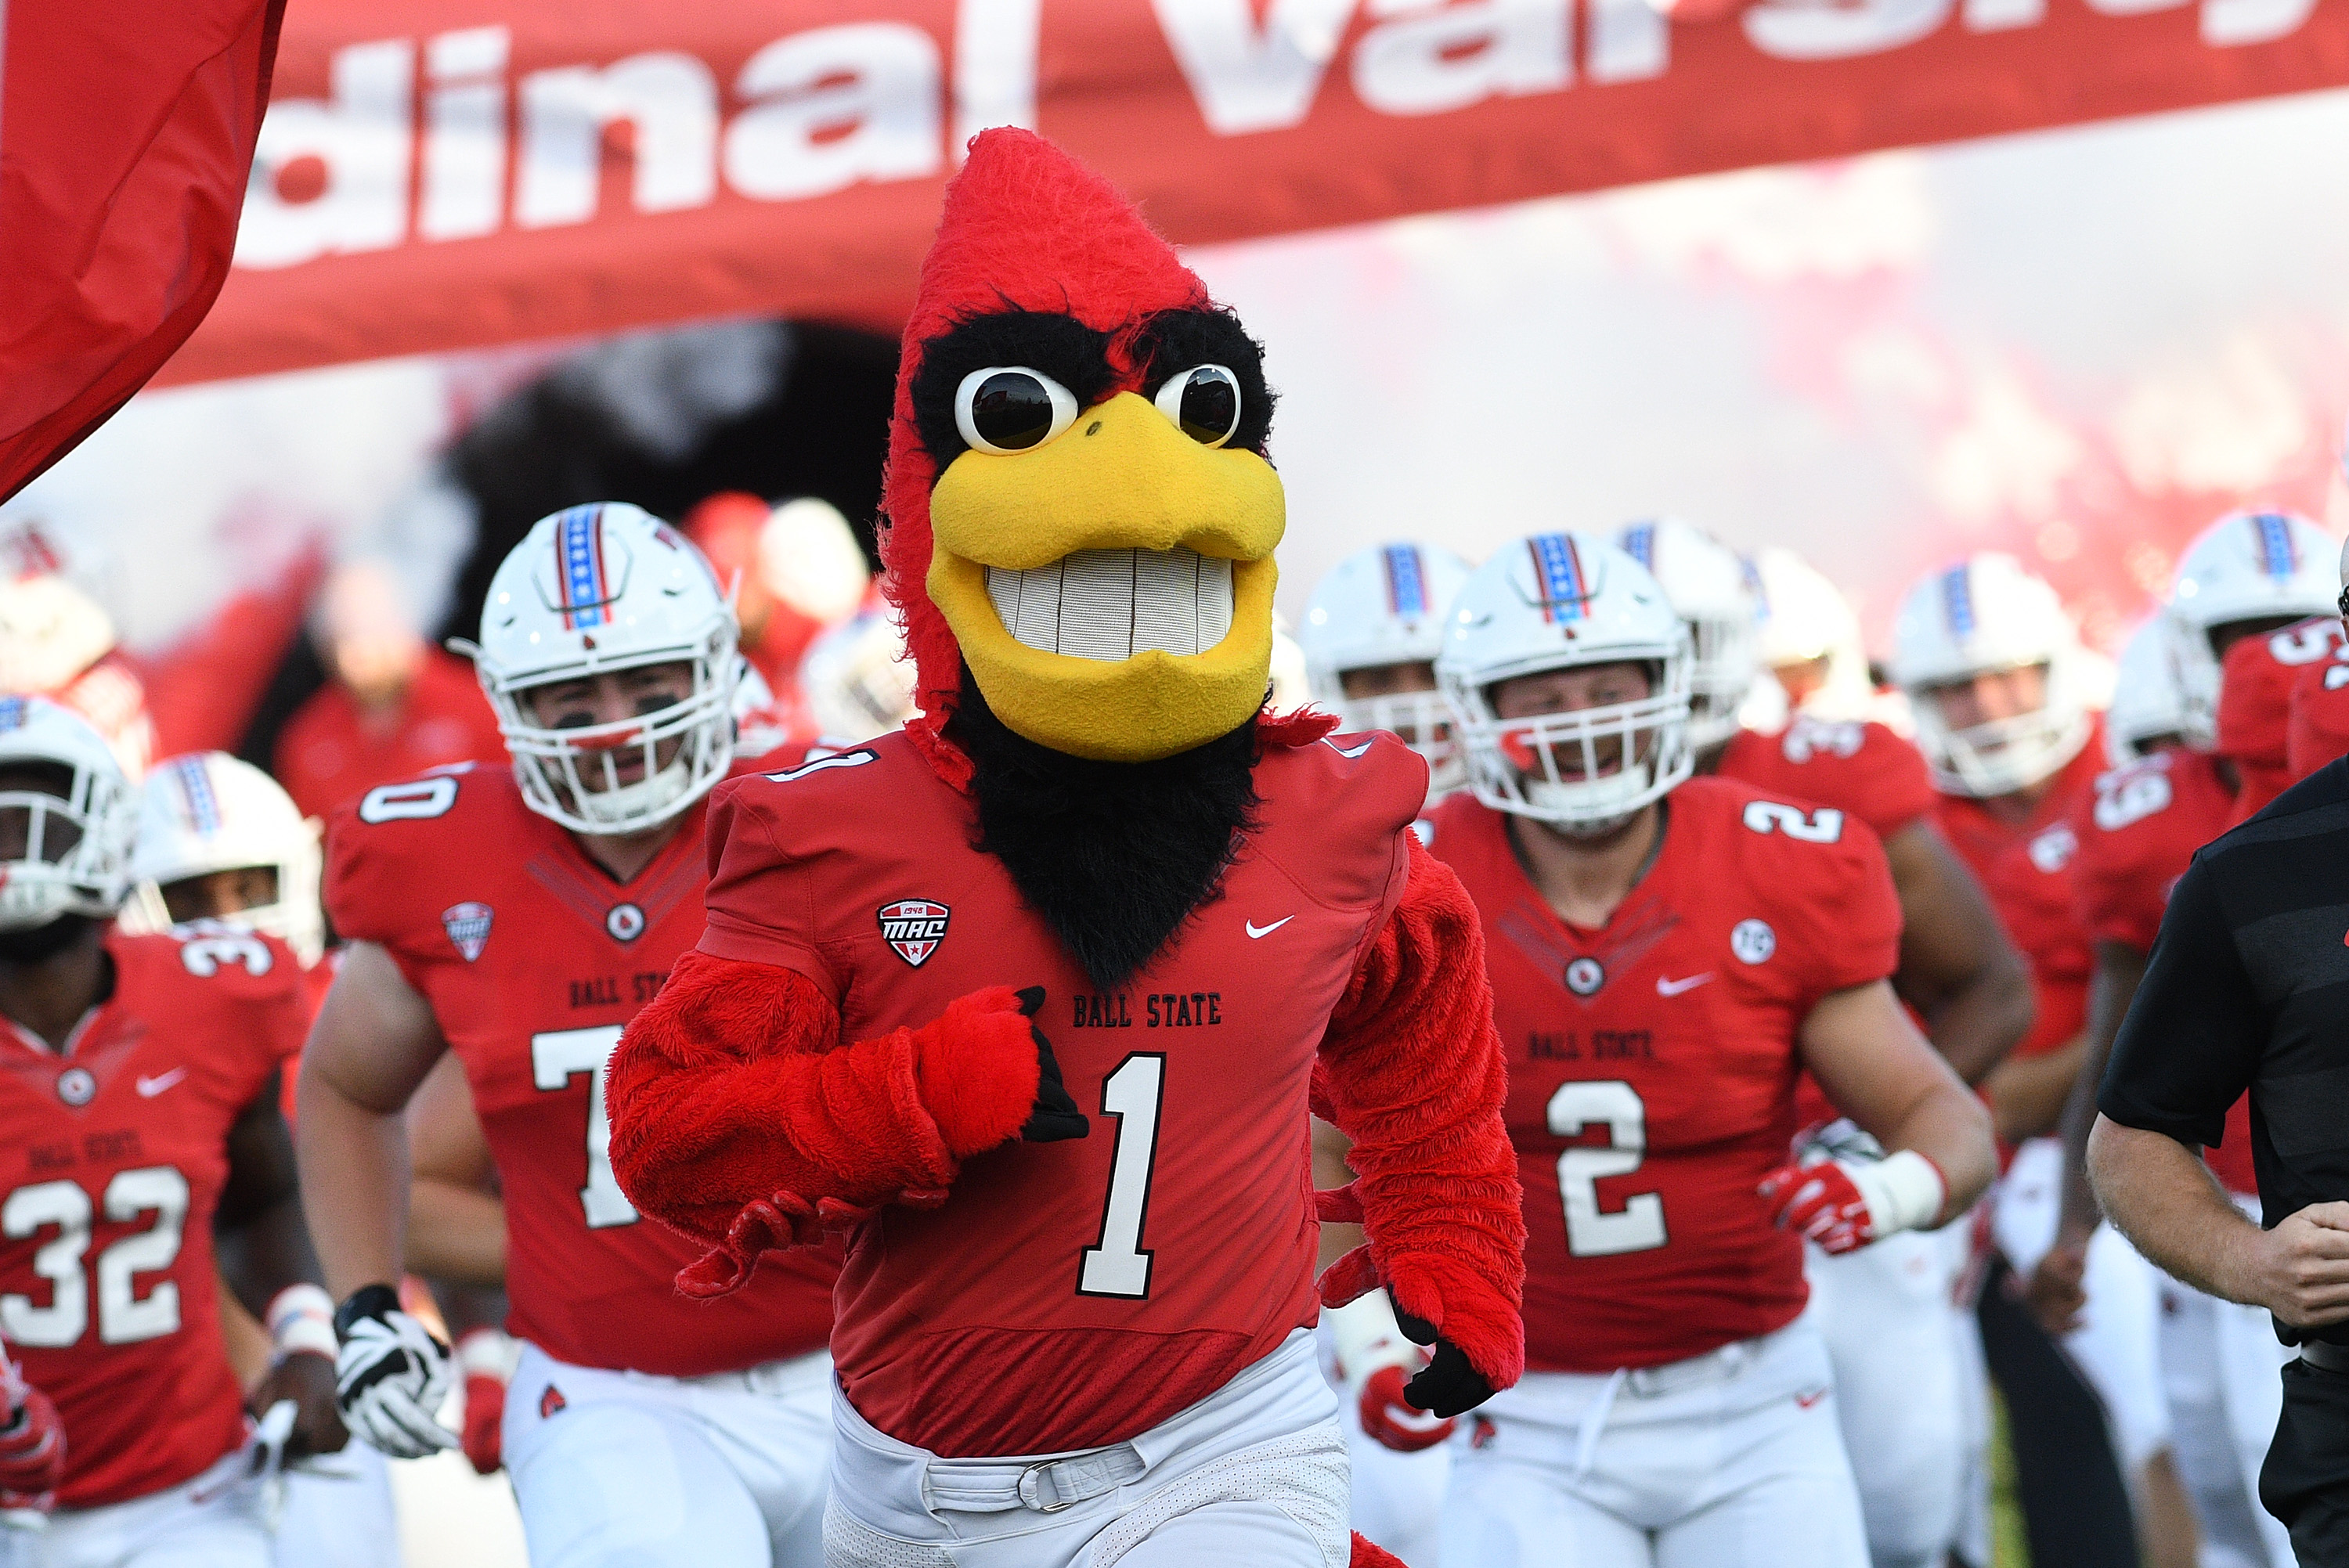 COLLEGE FOOTBALL: AUG 30 Central Connecticut at Ball State